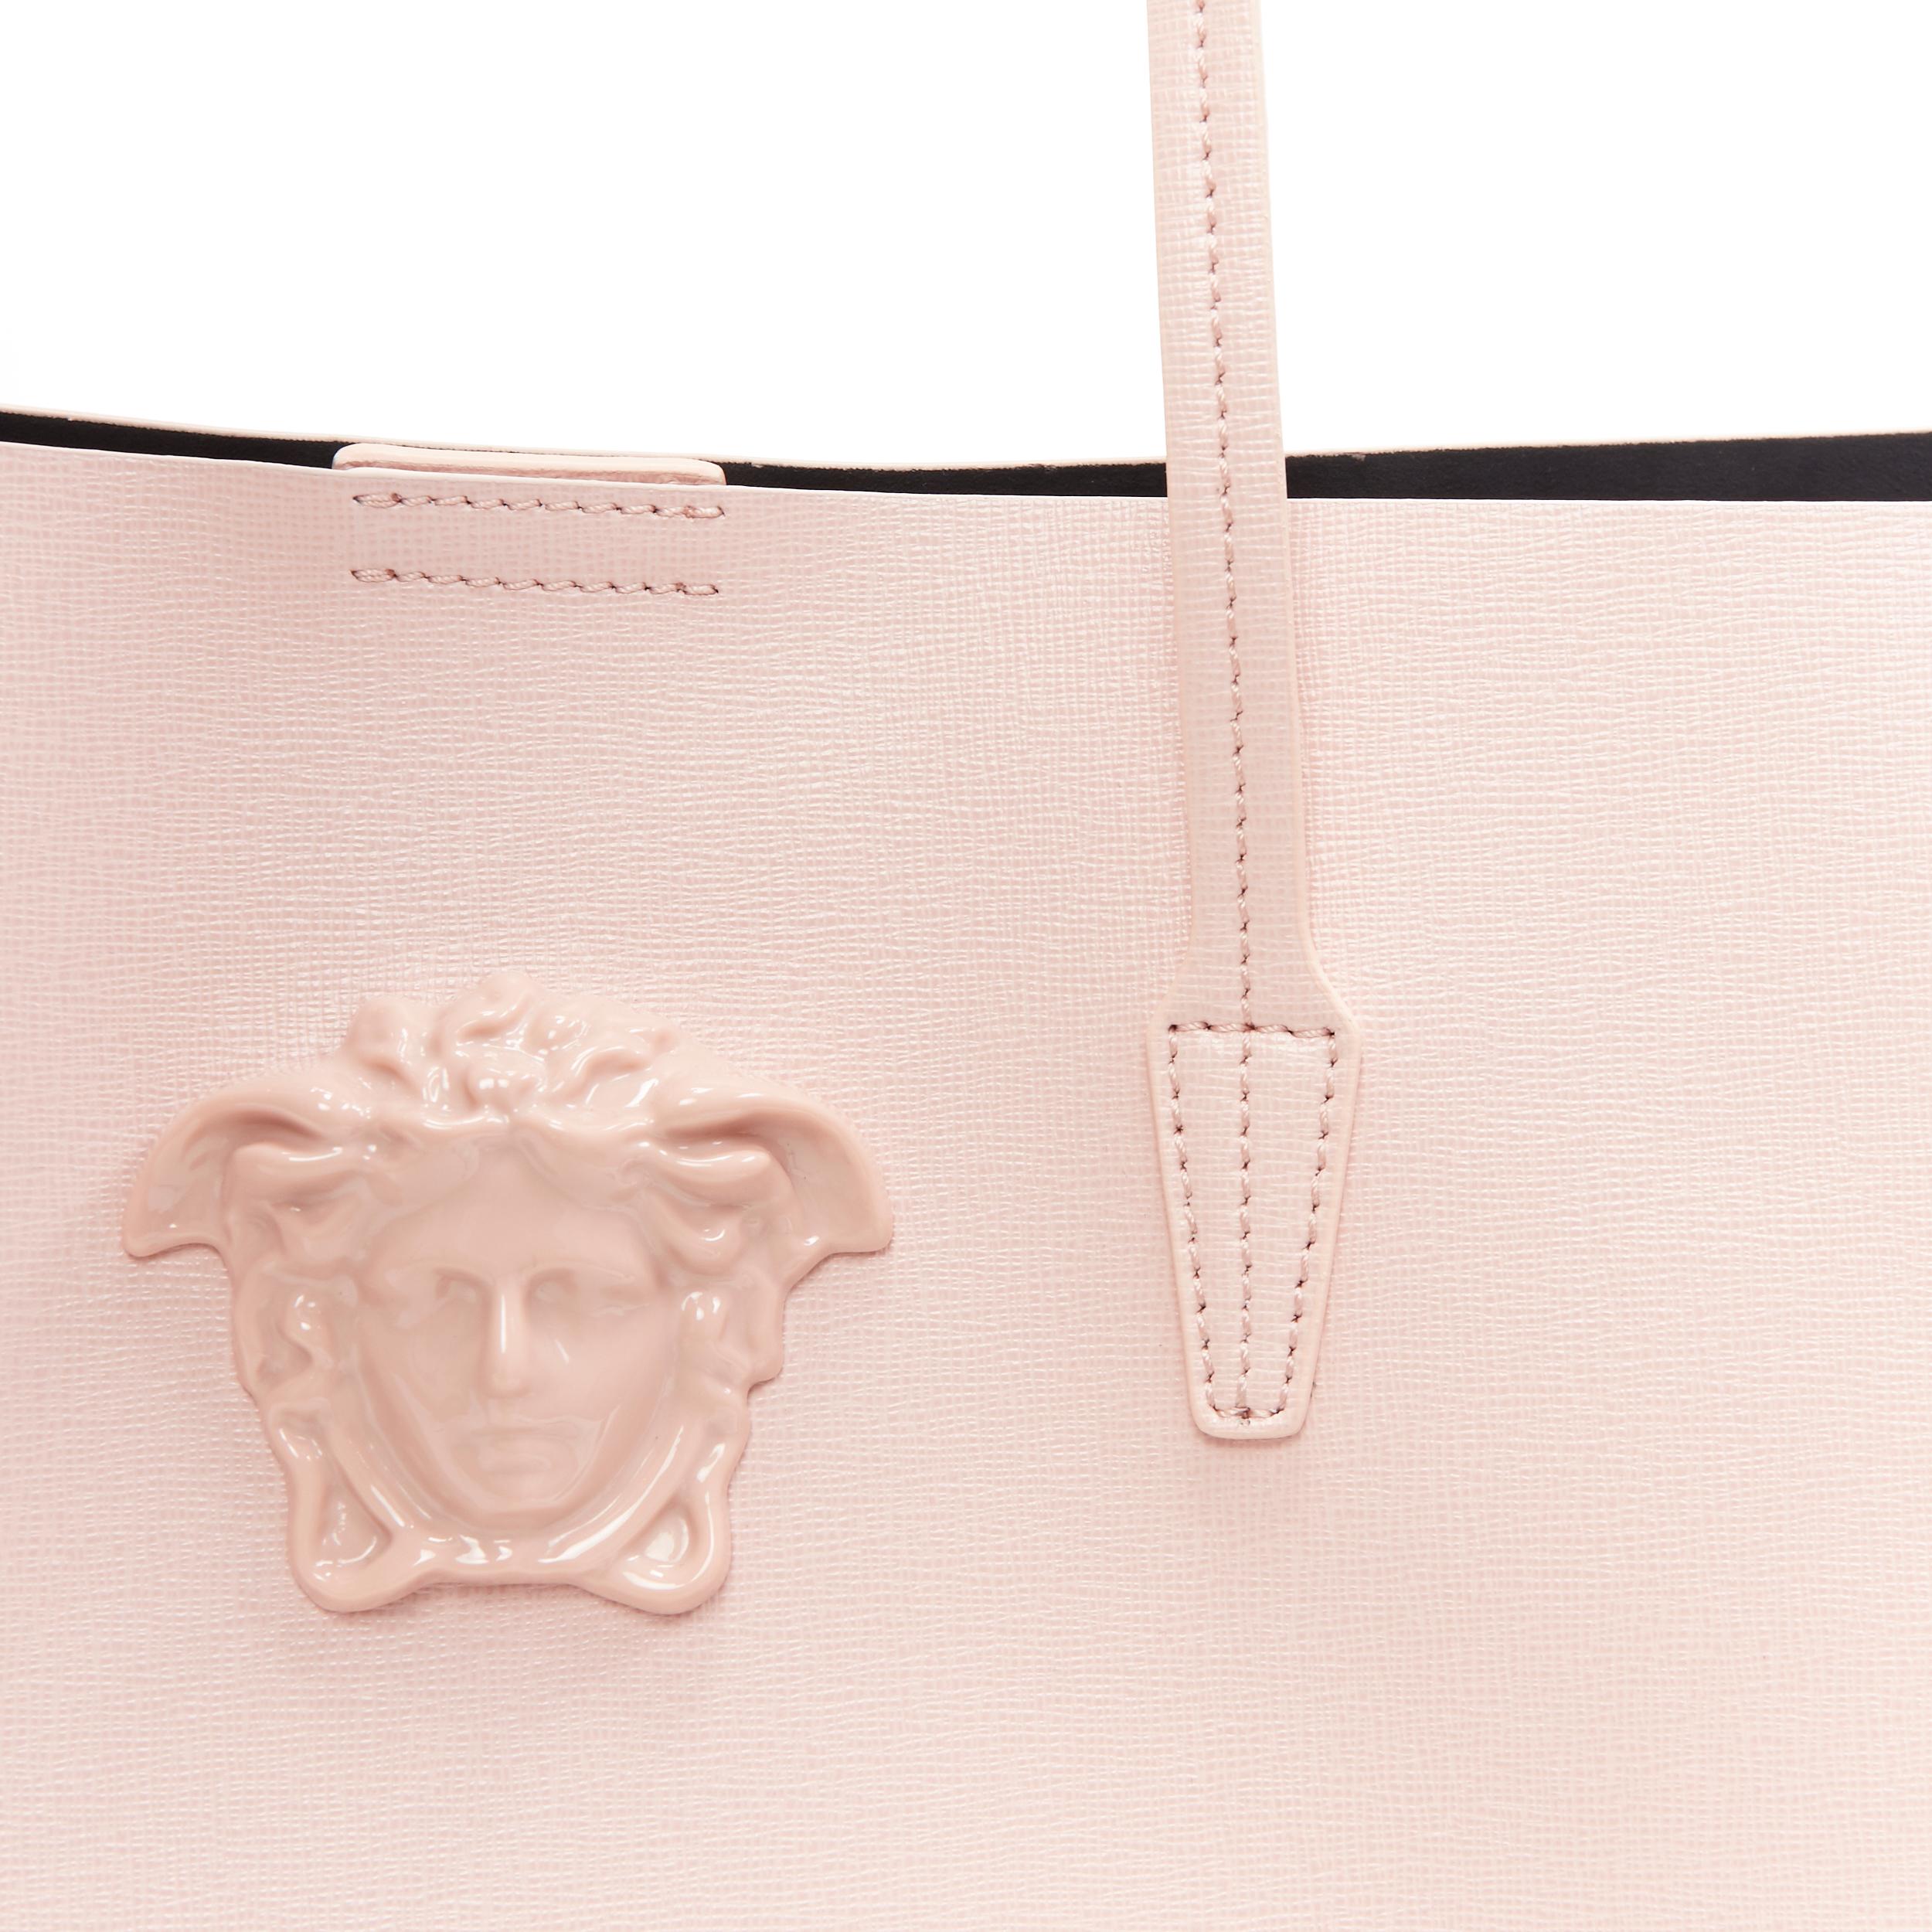 new VERSACE Palazzo Medusa light pink saffiano leather large neverfull tote bag 2